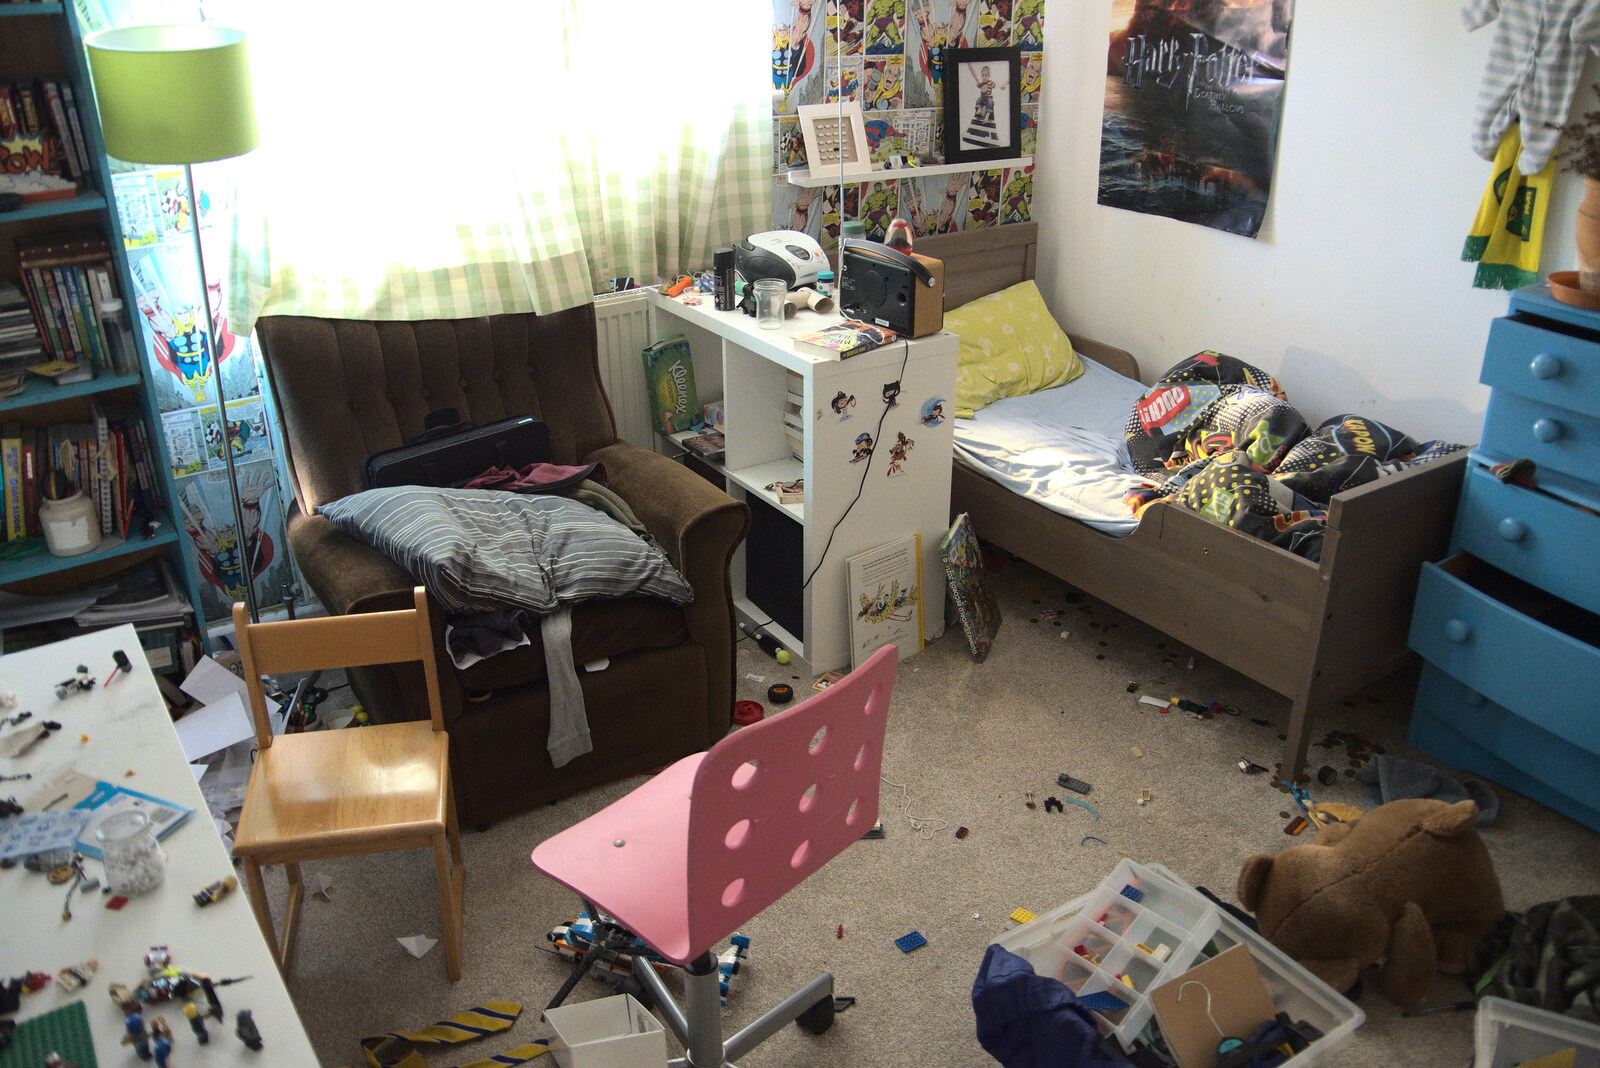 Fred's bedroom has exploded or something from BSCC Beer Garden Hypothermia, Hoxne and Brome, Suffolk - 22nd April 2021